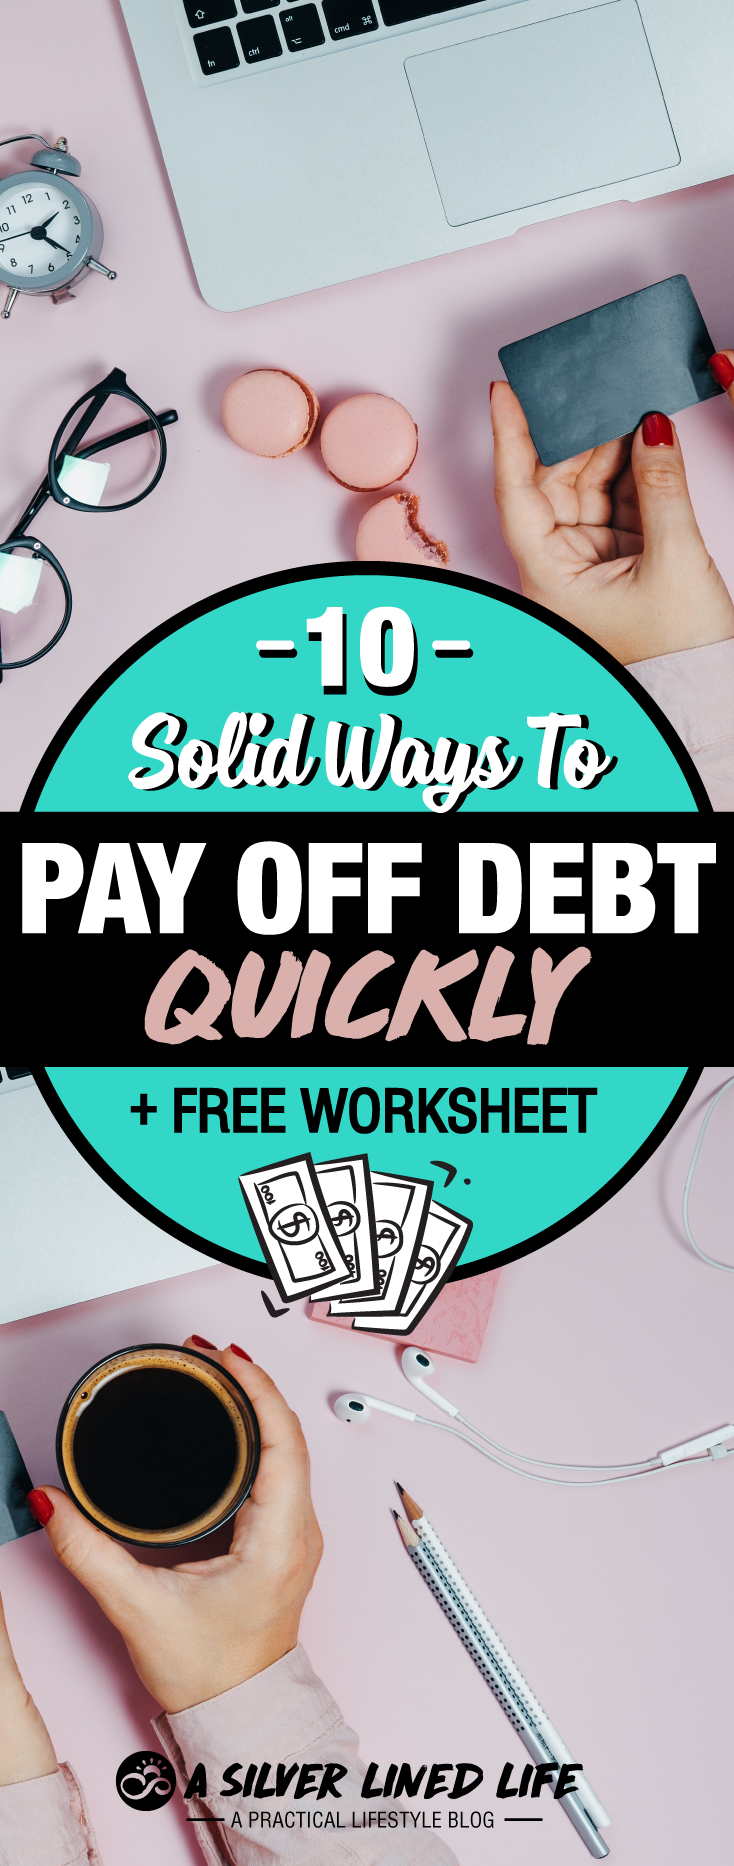 How to pay off debt quickly: from credit card debt to loan debt, check out this AMAZING post + printables. All the tips you need including Dave Ramsey advice, stories, motivation, a wonderful tracker, and strategies. Become debt free and have a debt free living with financial freedom. #SLL #debtfree #payoffdebt #financialfreedom #daveramsey